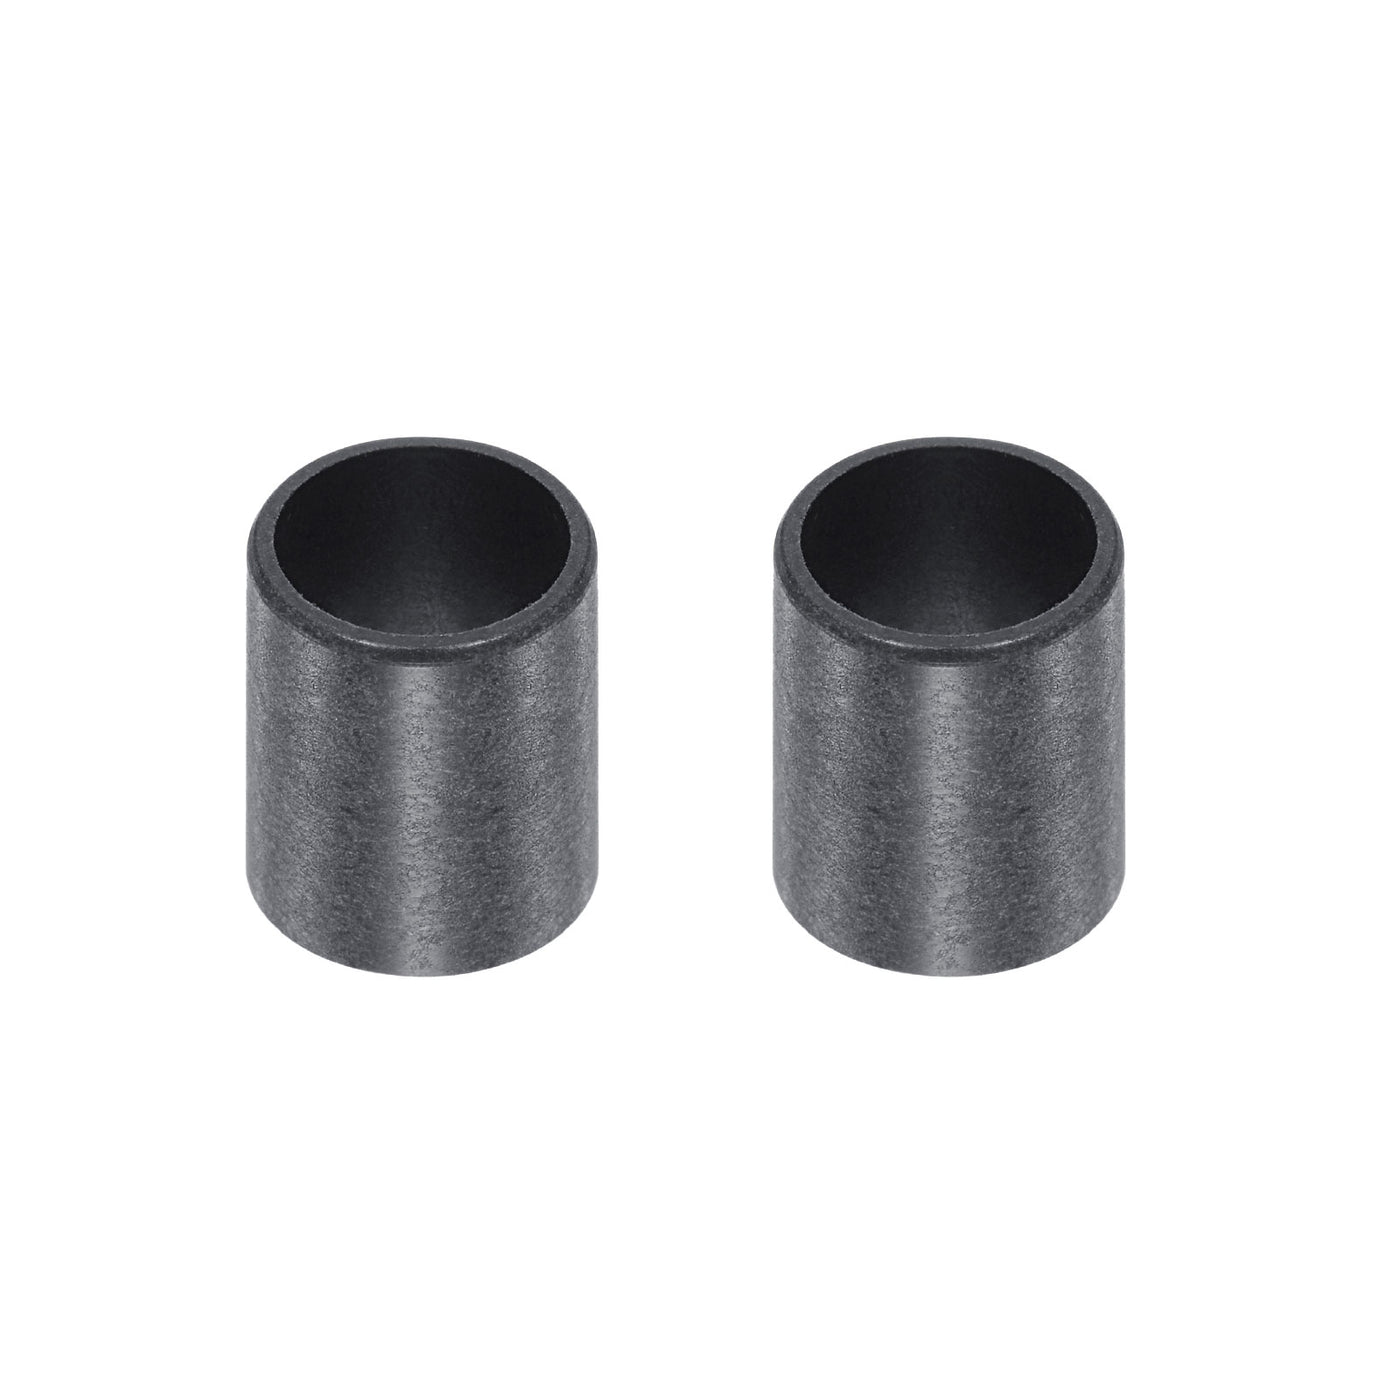 uxcell Uxcell Sleeve Bearings 10mmx12mmx15mm POM Wrapped Oilless Bushings Black 2pcs